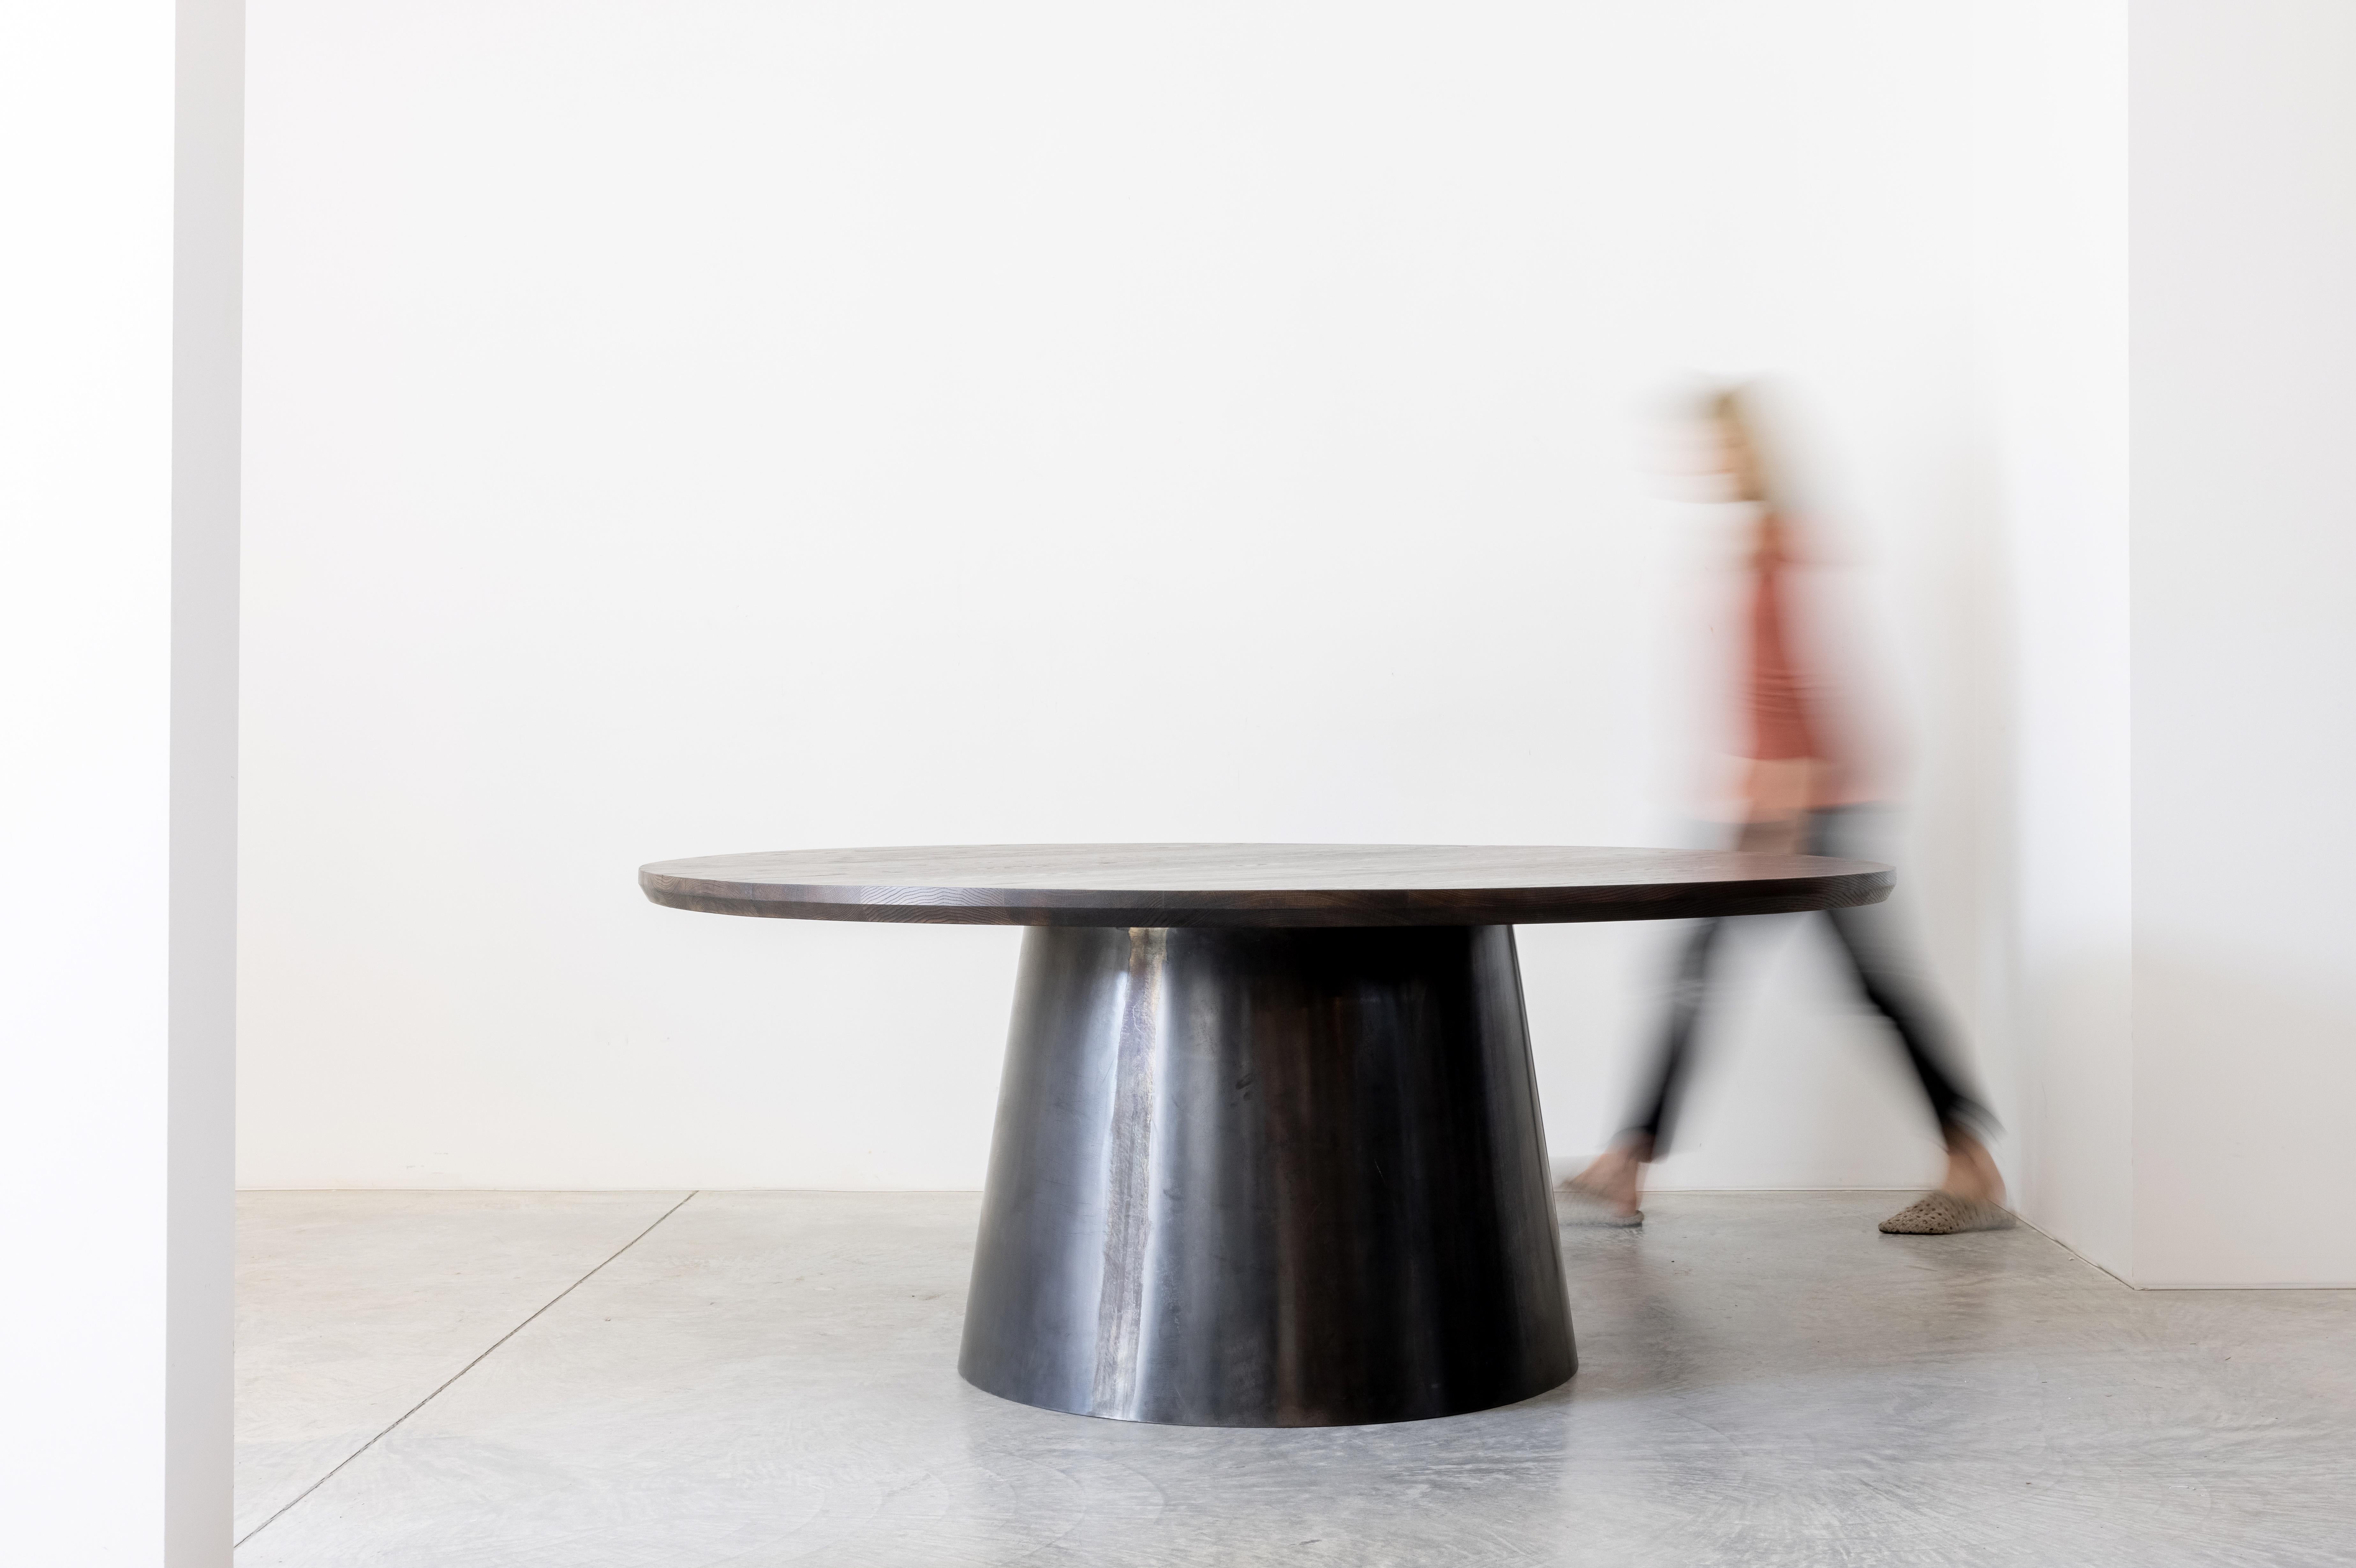 A dramatic round table featuring a thick blackened steel base. The curved conical base is meticulously curved and joined to create a virtual seamless connection, acting as a sculptural form. The 8-degree taper helps form depth and an intrinsic value